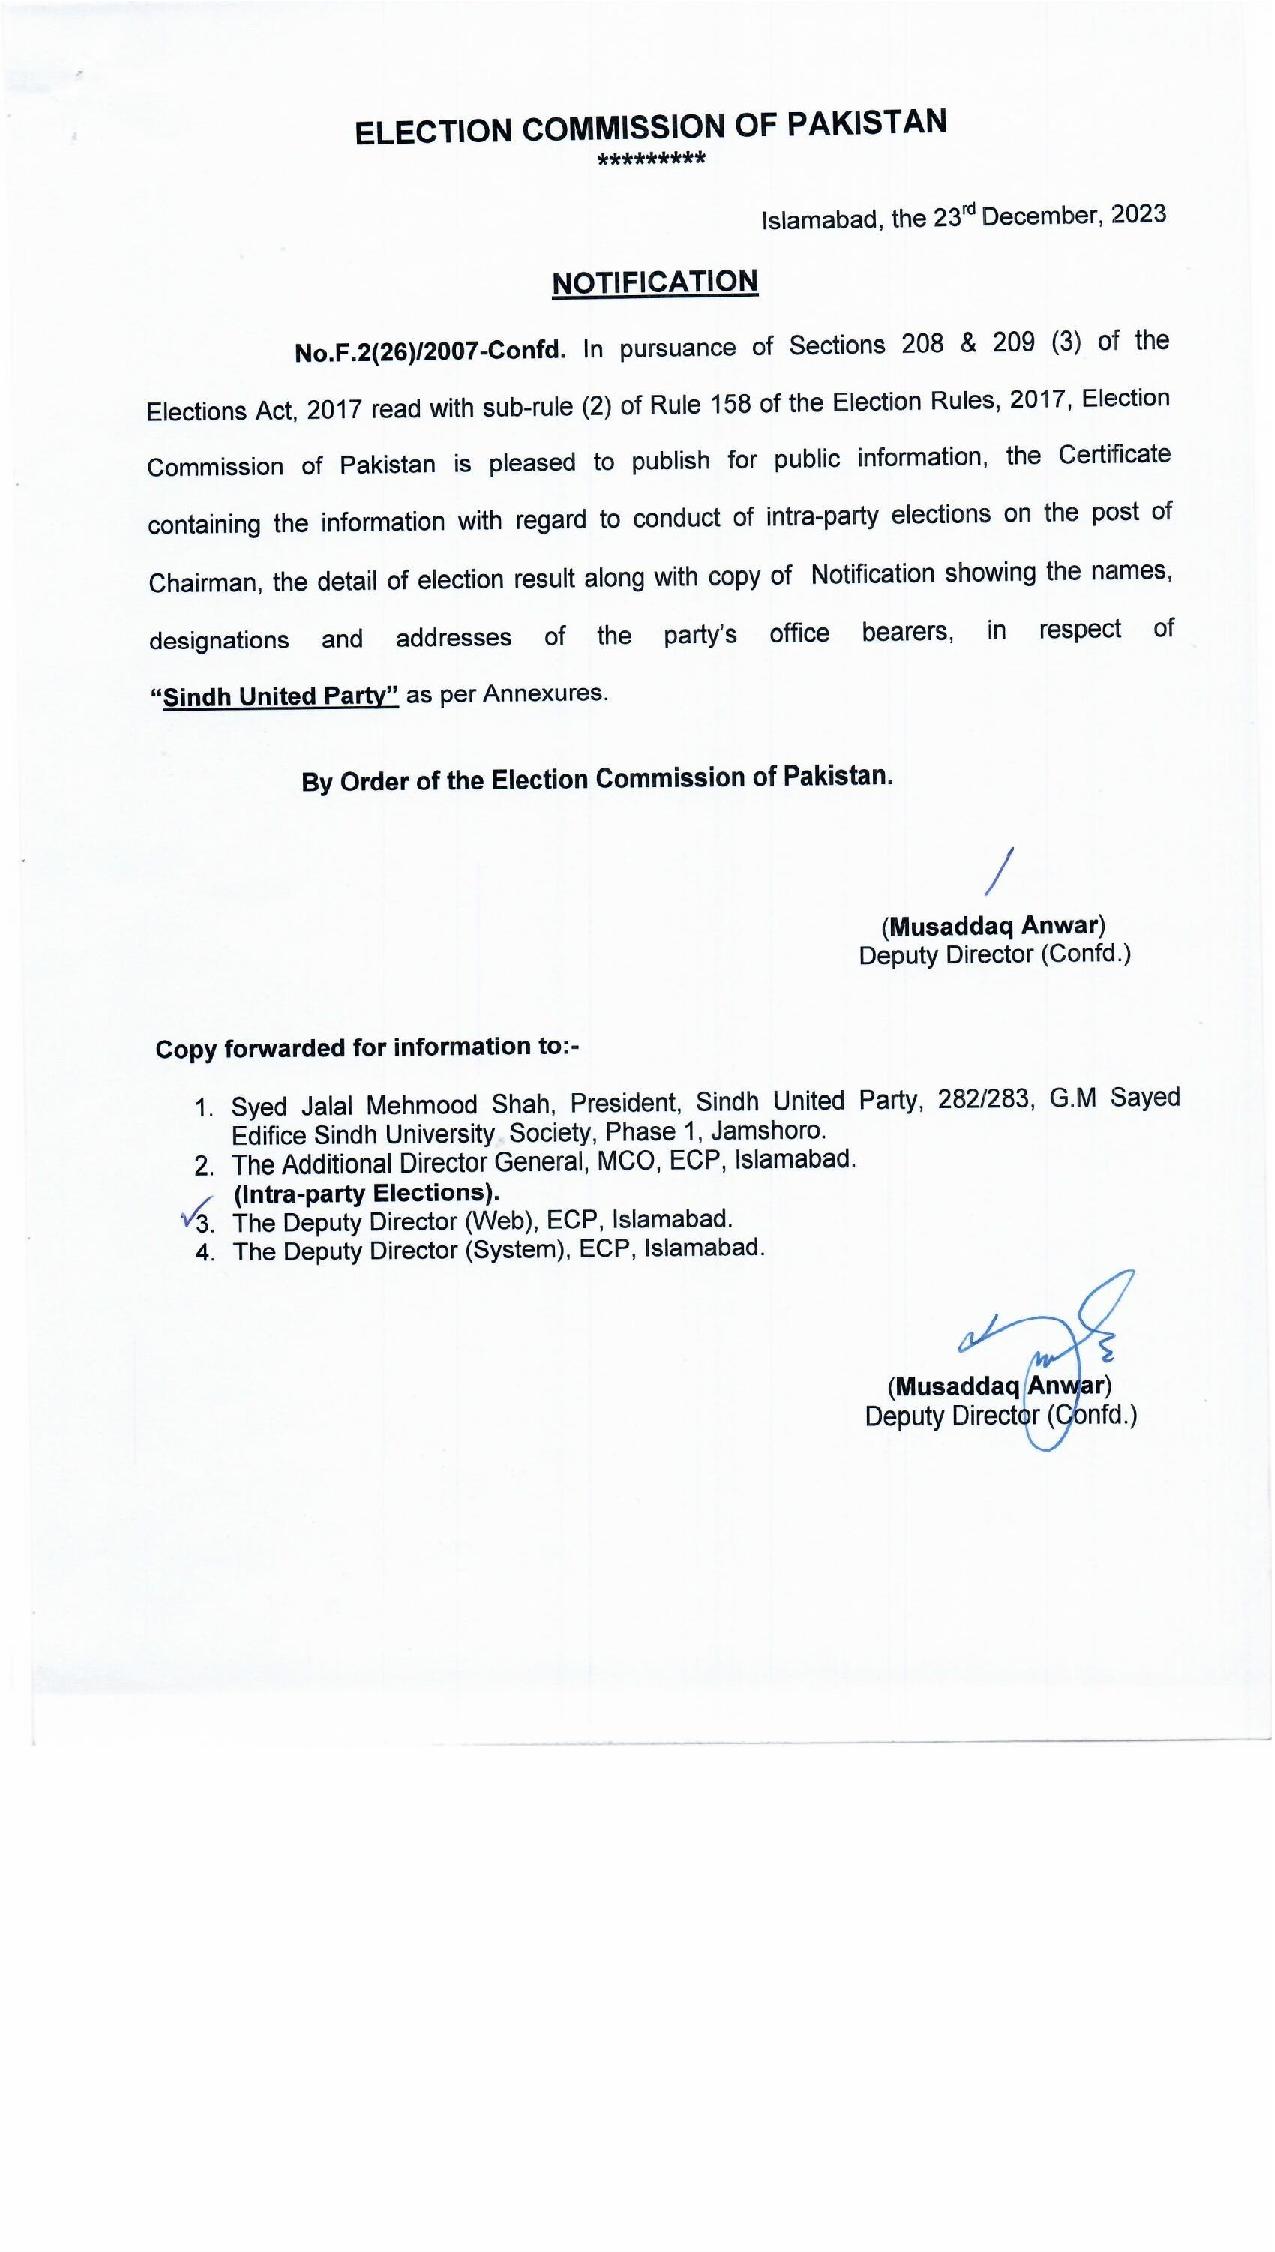 Notification Intra-Party Elections of "Sindh United Party"